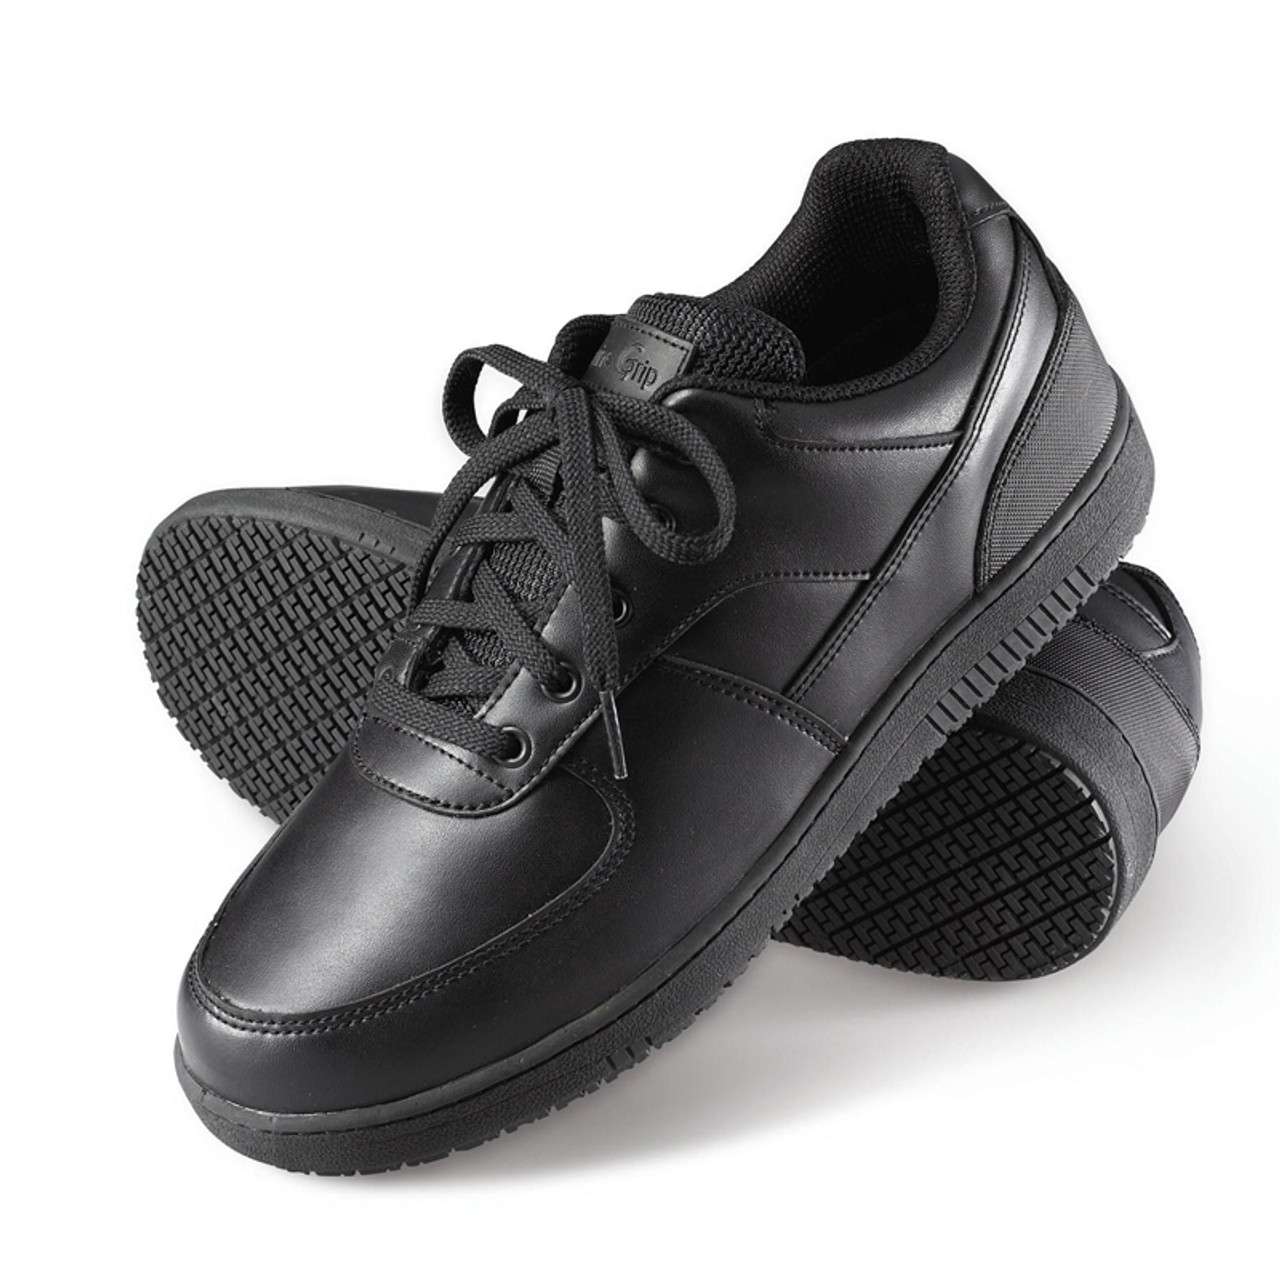 athletic works non slip shoes